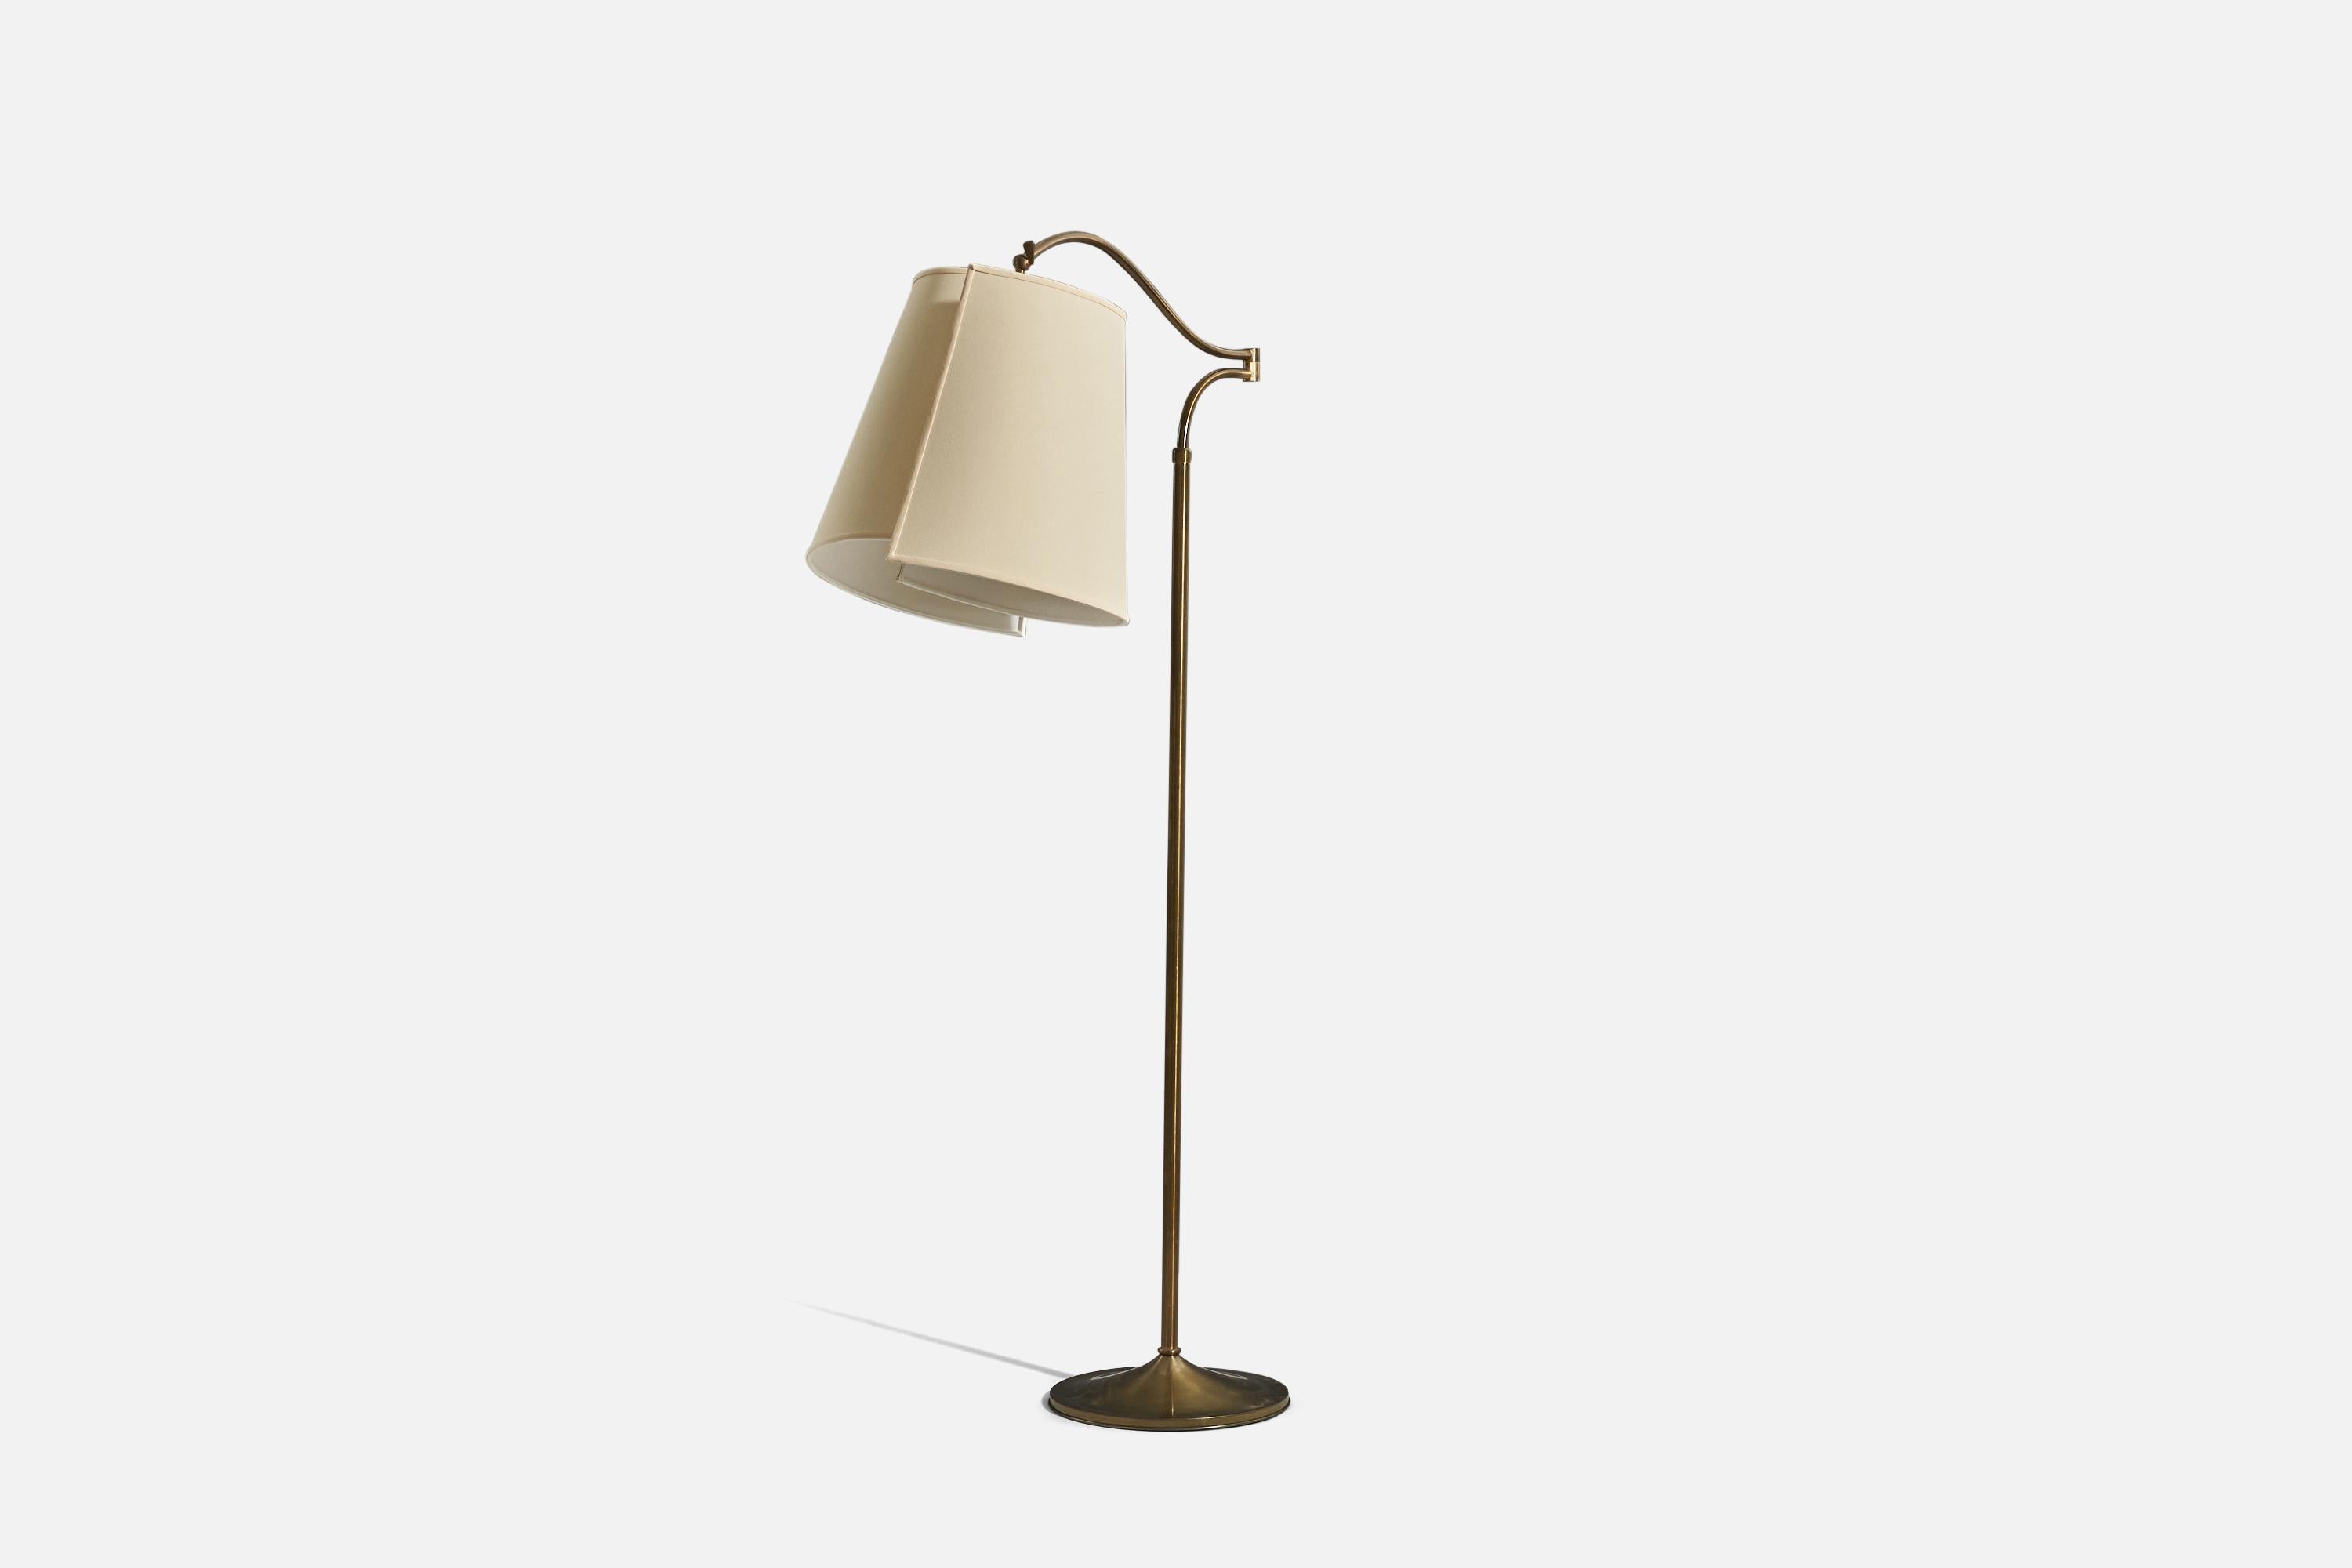 A brass and fabric floor lamp designed and produced in Italy, 1940s.

Variable dimensions, measured as illustrated in the first image.